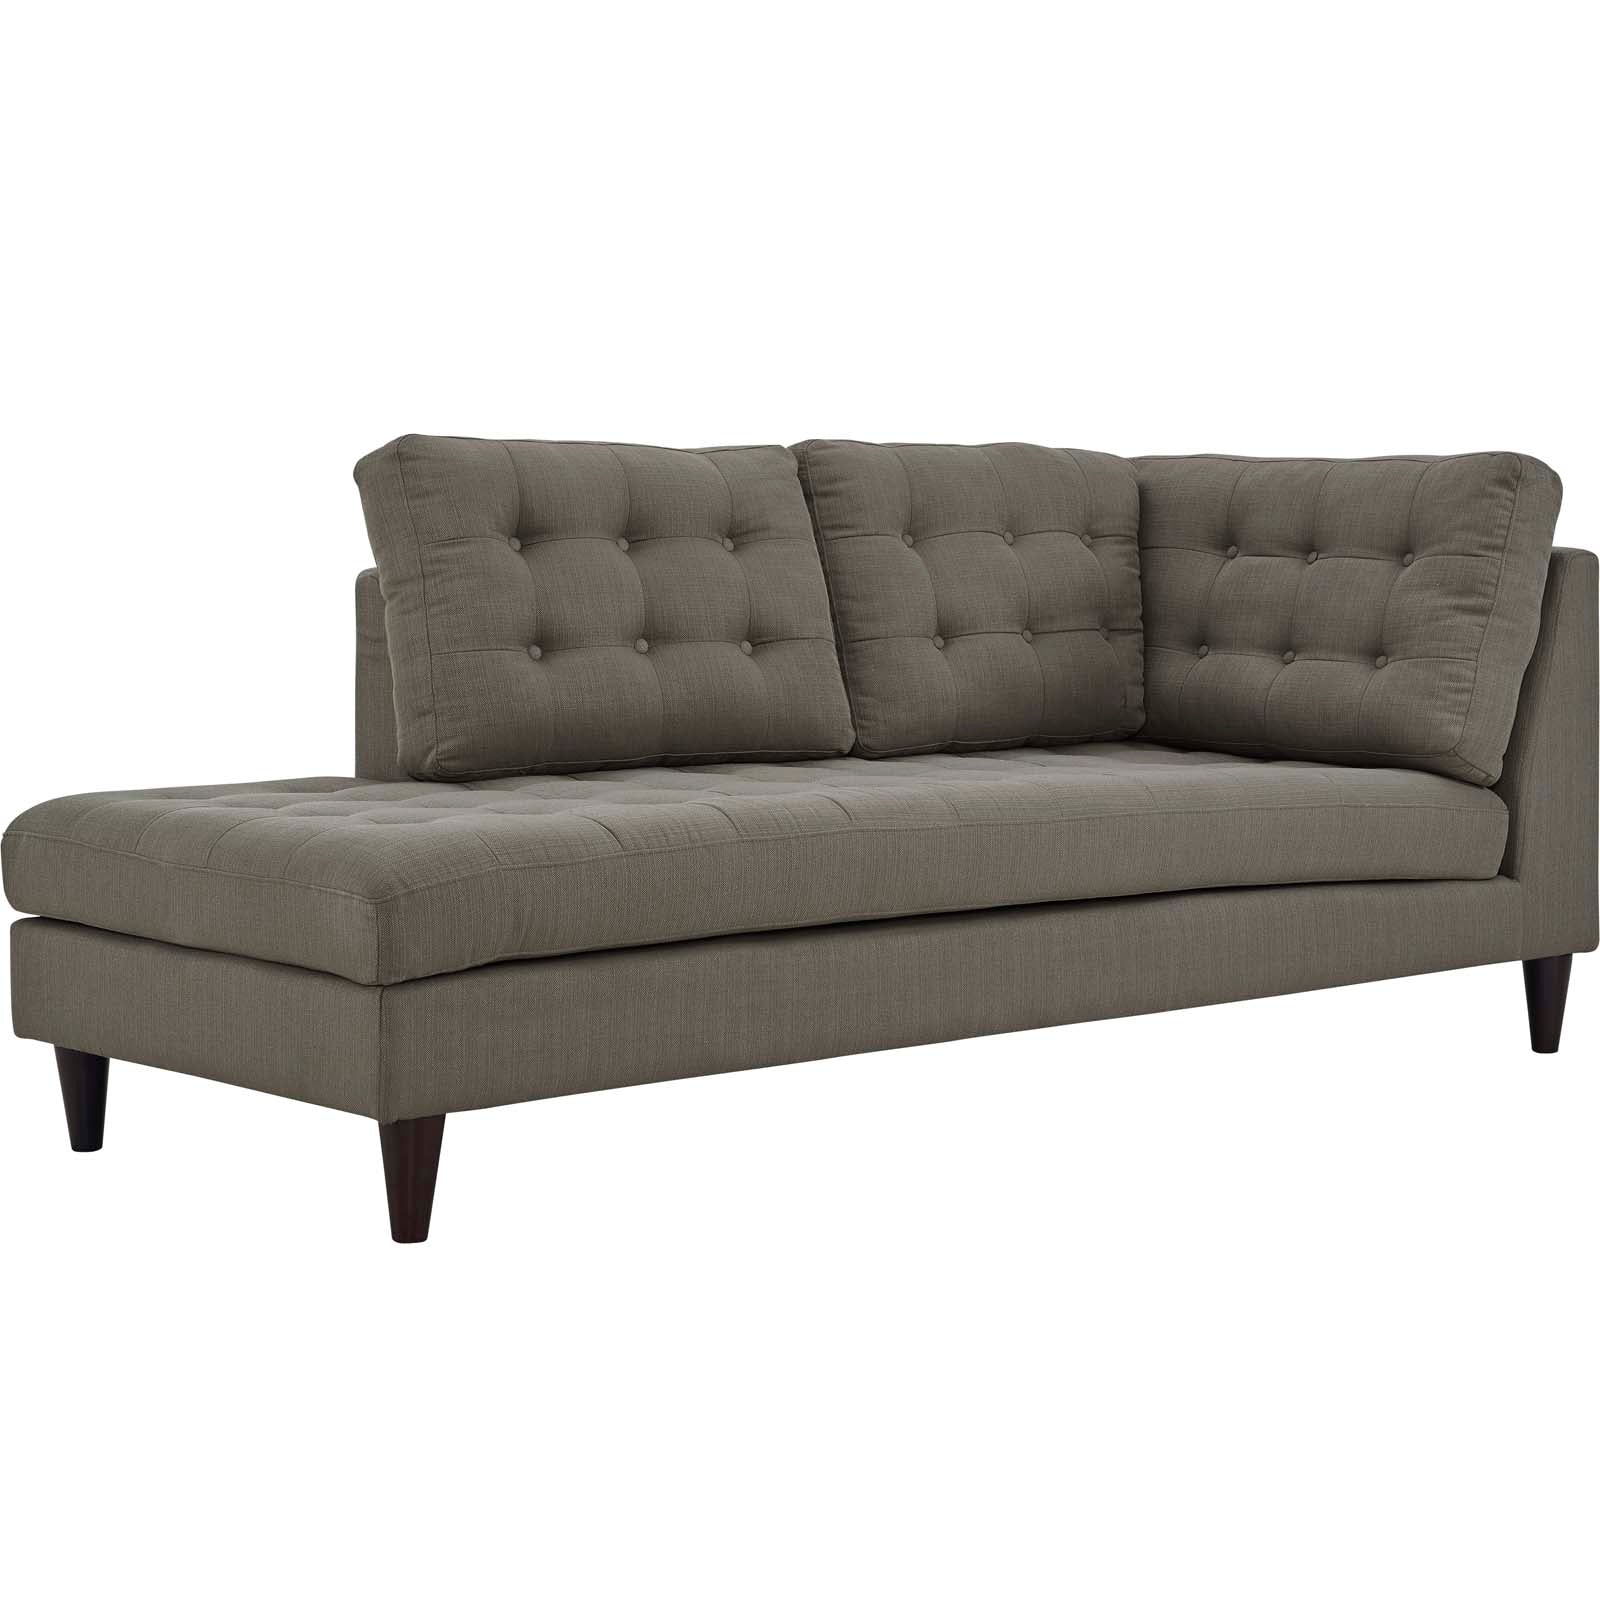 Modway Sectional Sofas - Empress 2 Piece Upholstered Fabric Left Facing Bumper Sectional Granite